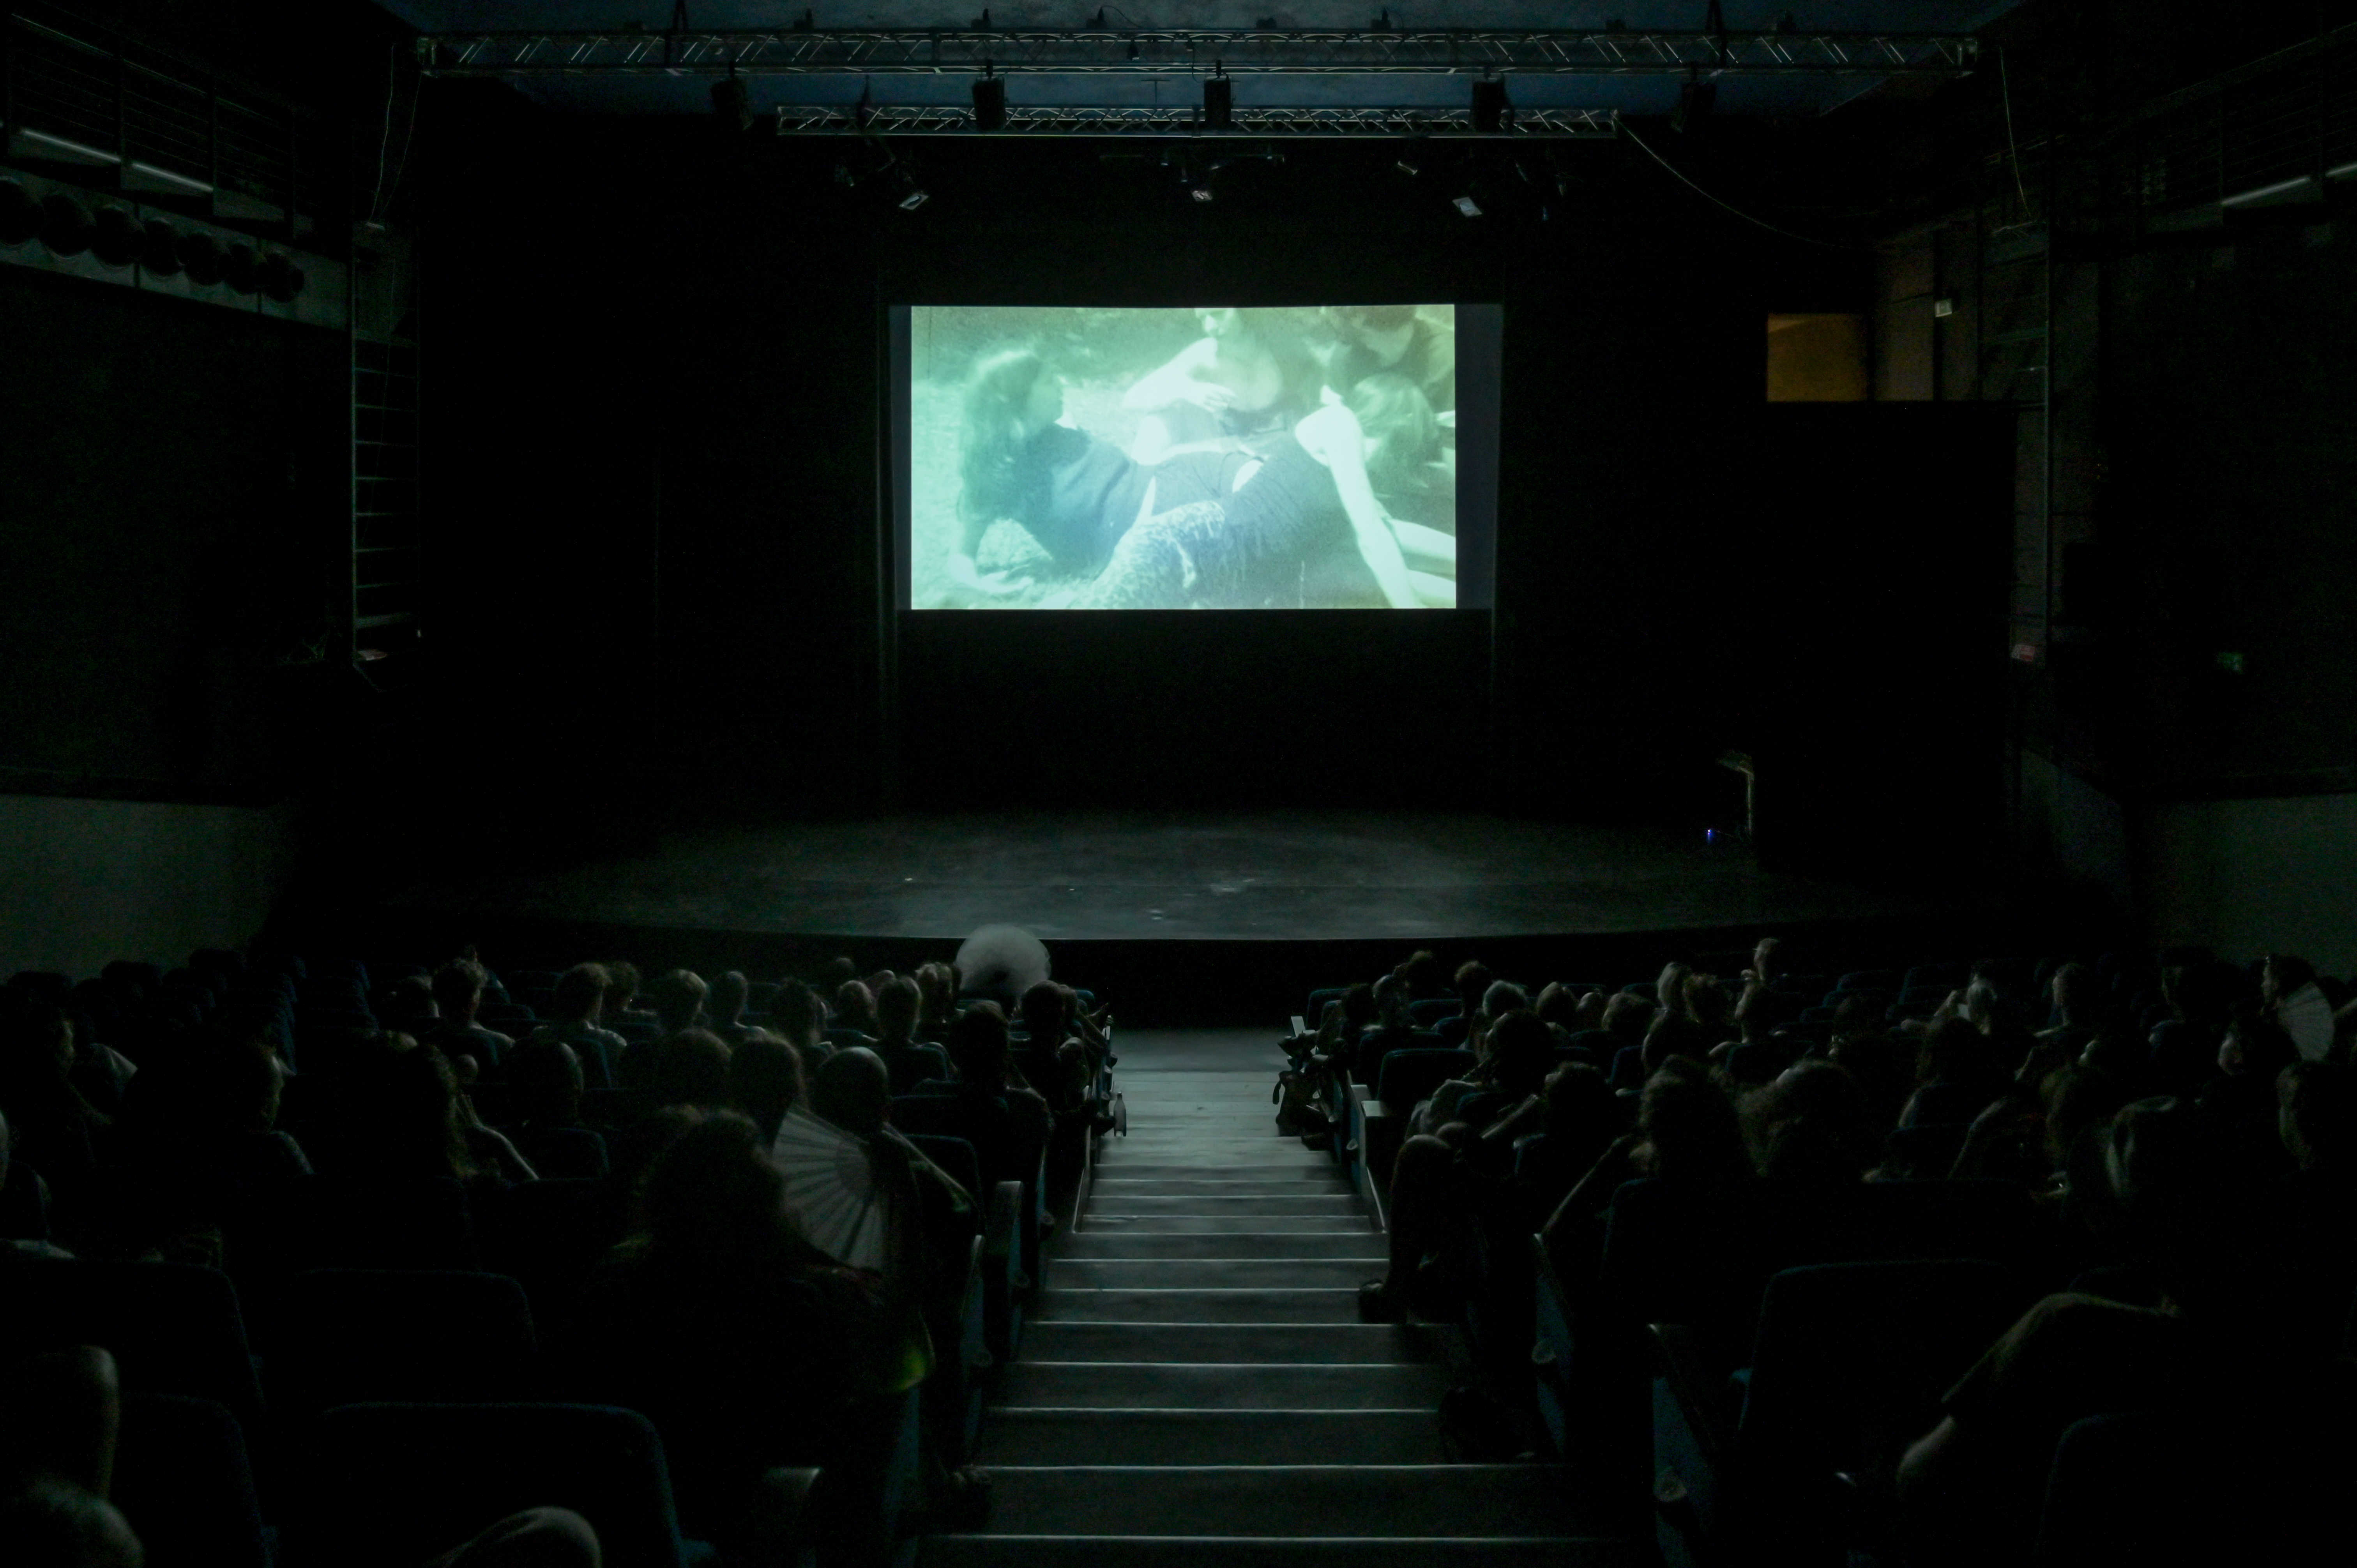 reprise, revise: (re)frame ~ a COOP SUMMIT 2022 performative screening curated and produced by the COOP study group Curating Positions: Nostalgia for the light*: Struggles’ Reverberations in Cinema. Location: Auditorium di Piazza Libertà in Bergamo.  Photo credit: Baha Görkem Yalim for DAI.  August, 2022.